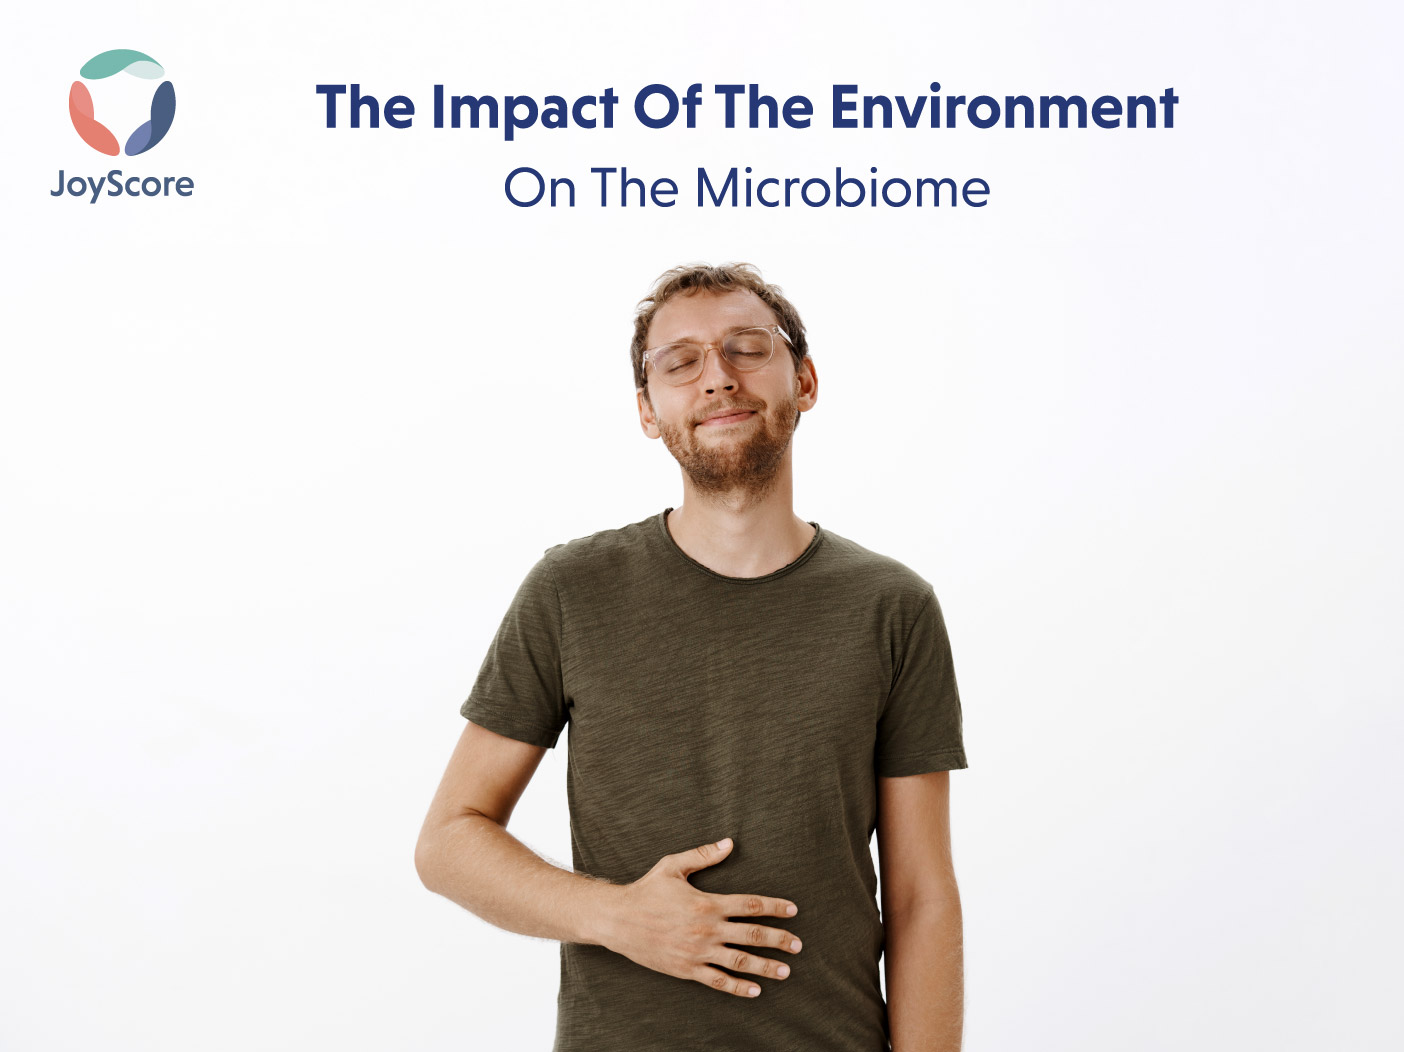 The impact of the environment on the microbiome